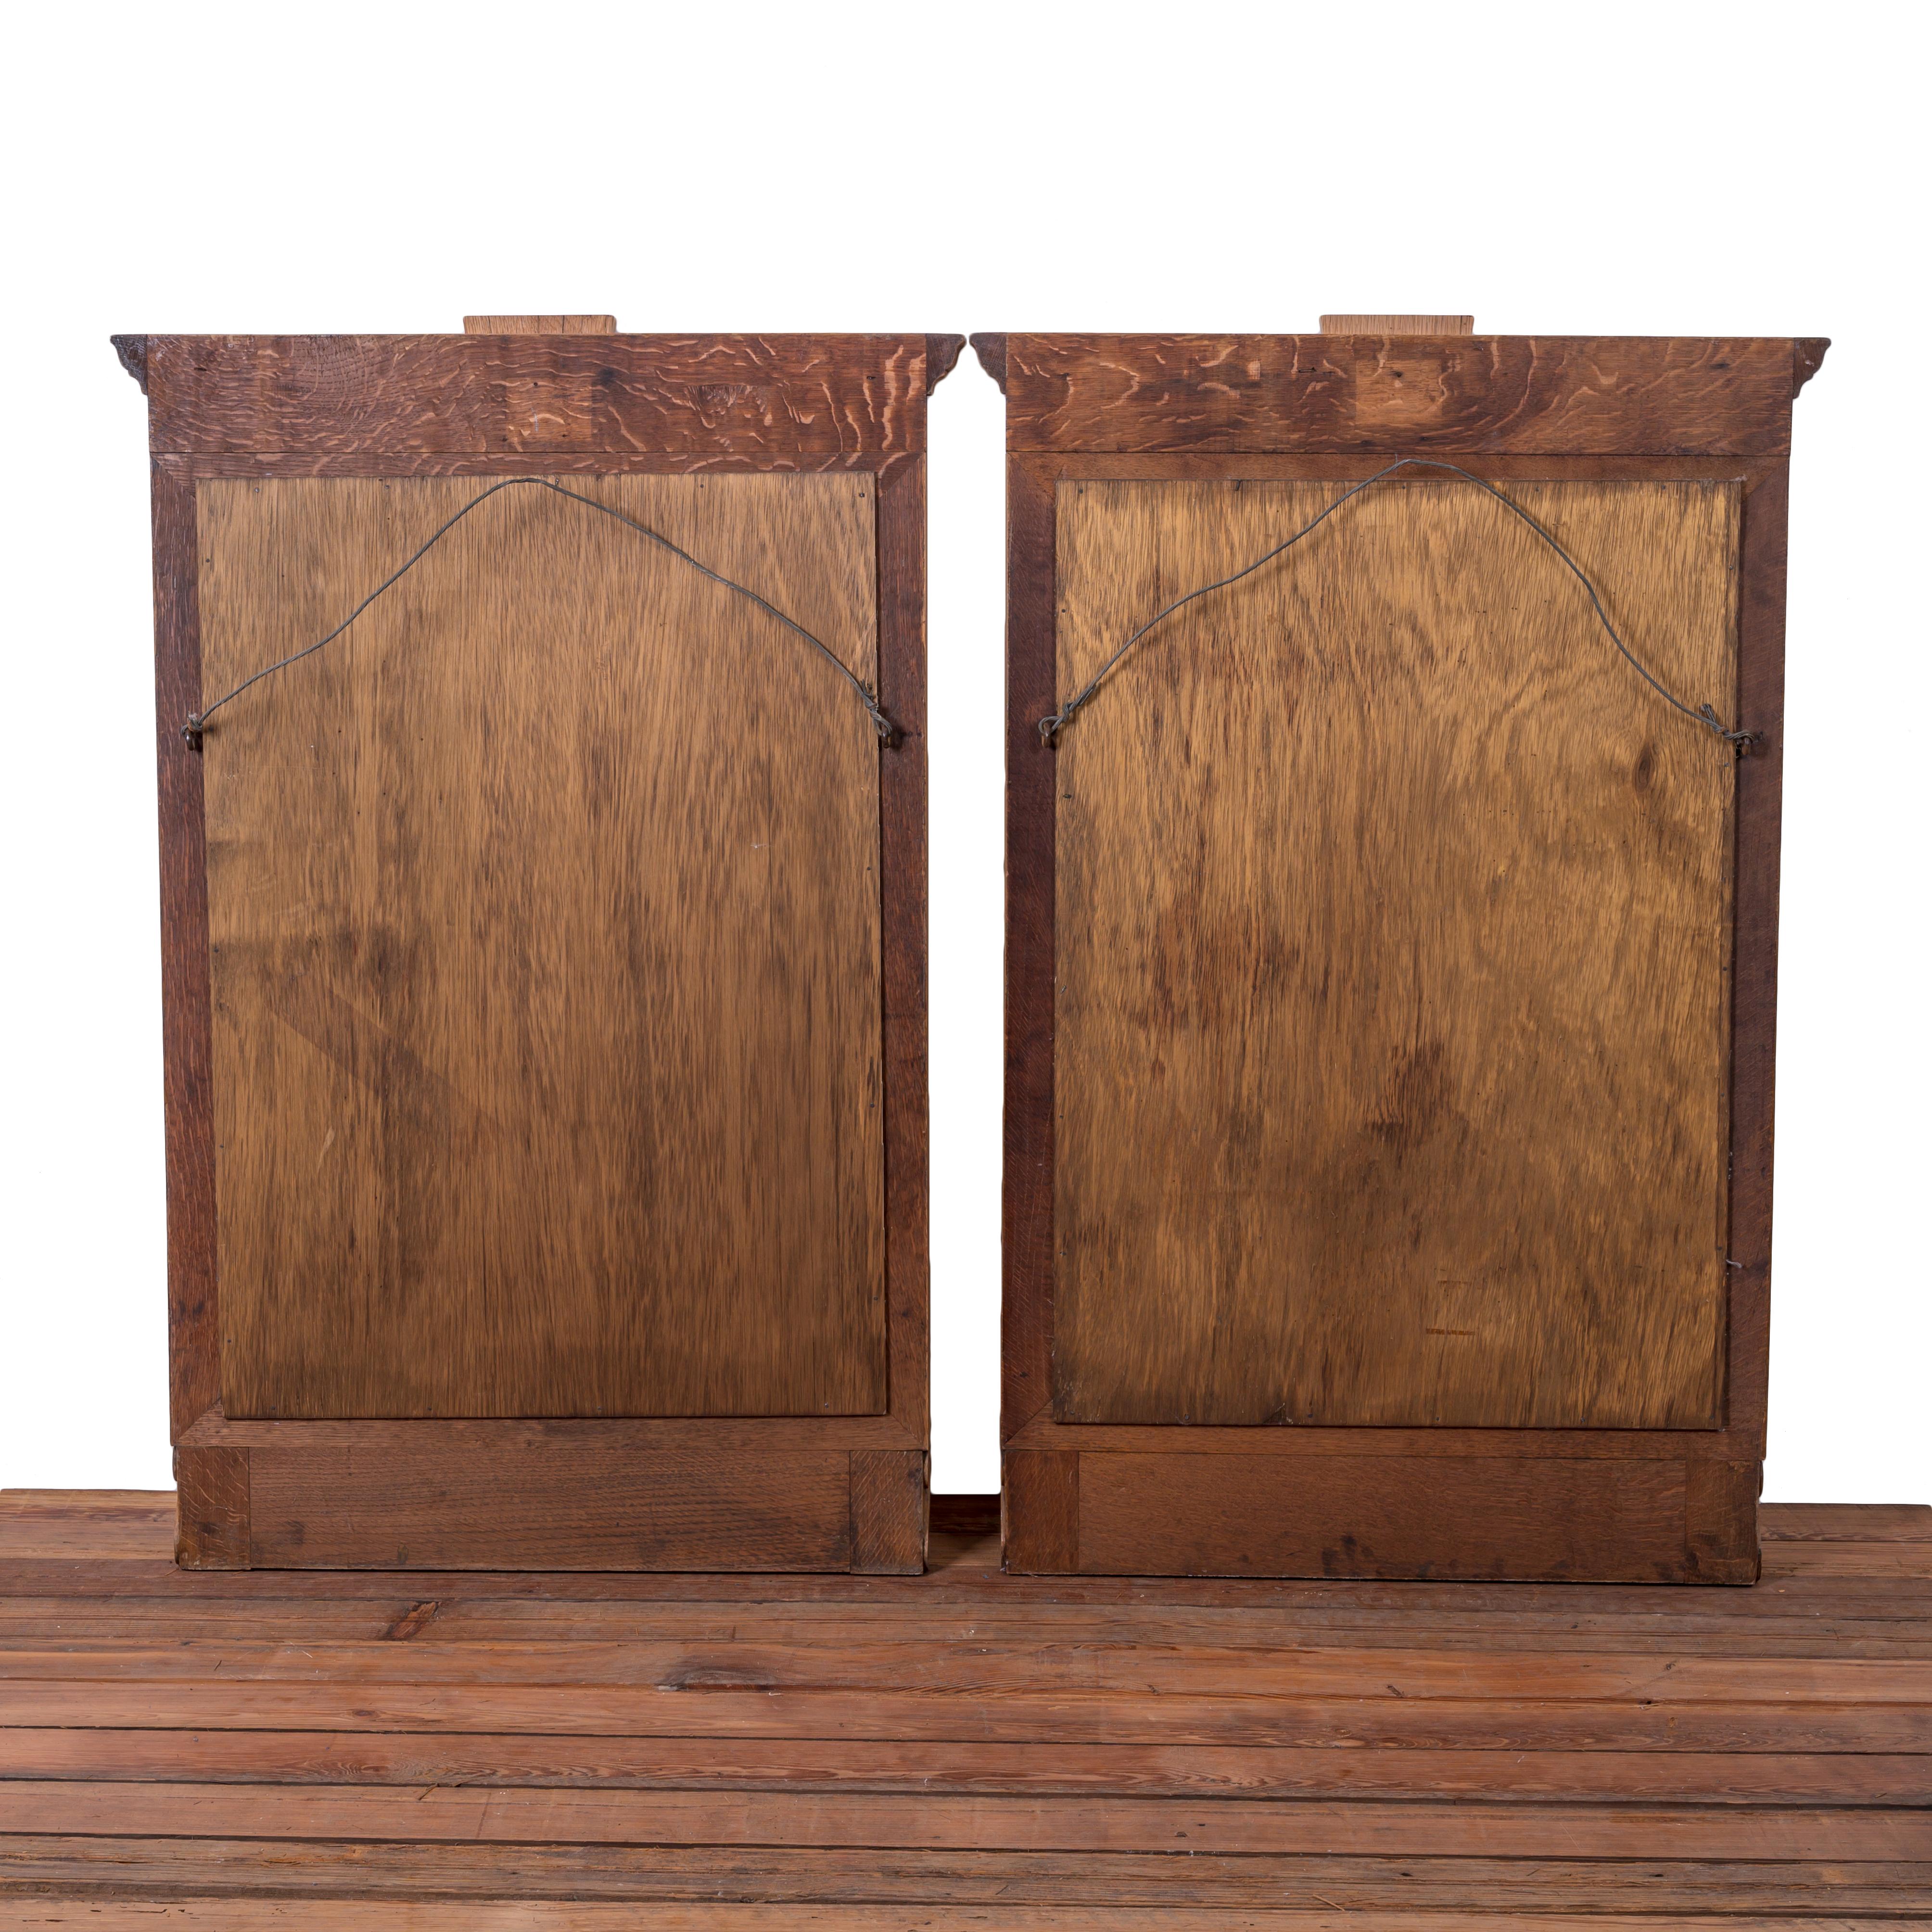 French Neoclassical Style Limed Oak Trumeau Mirrors, 19th Century - A Pair For Sale 6